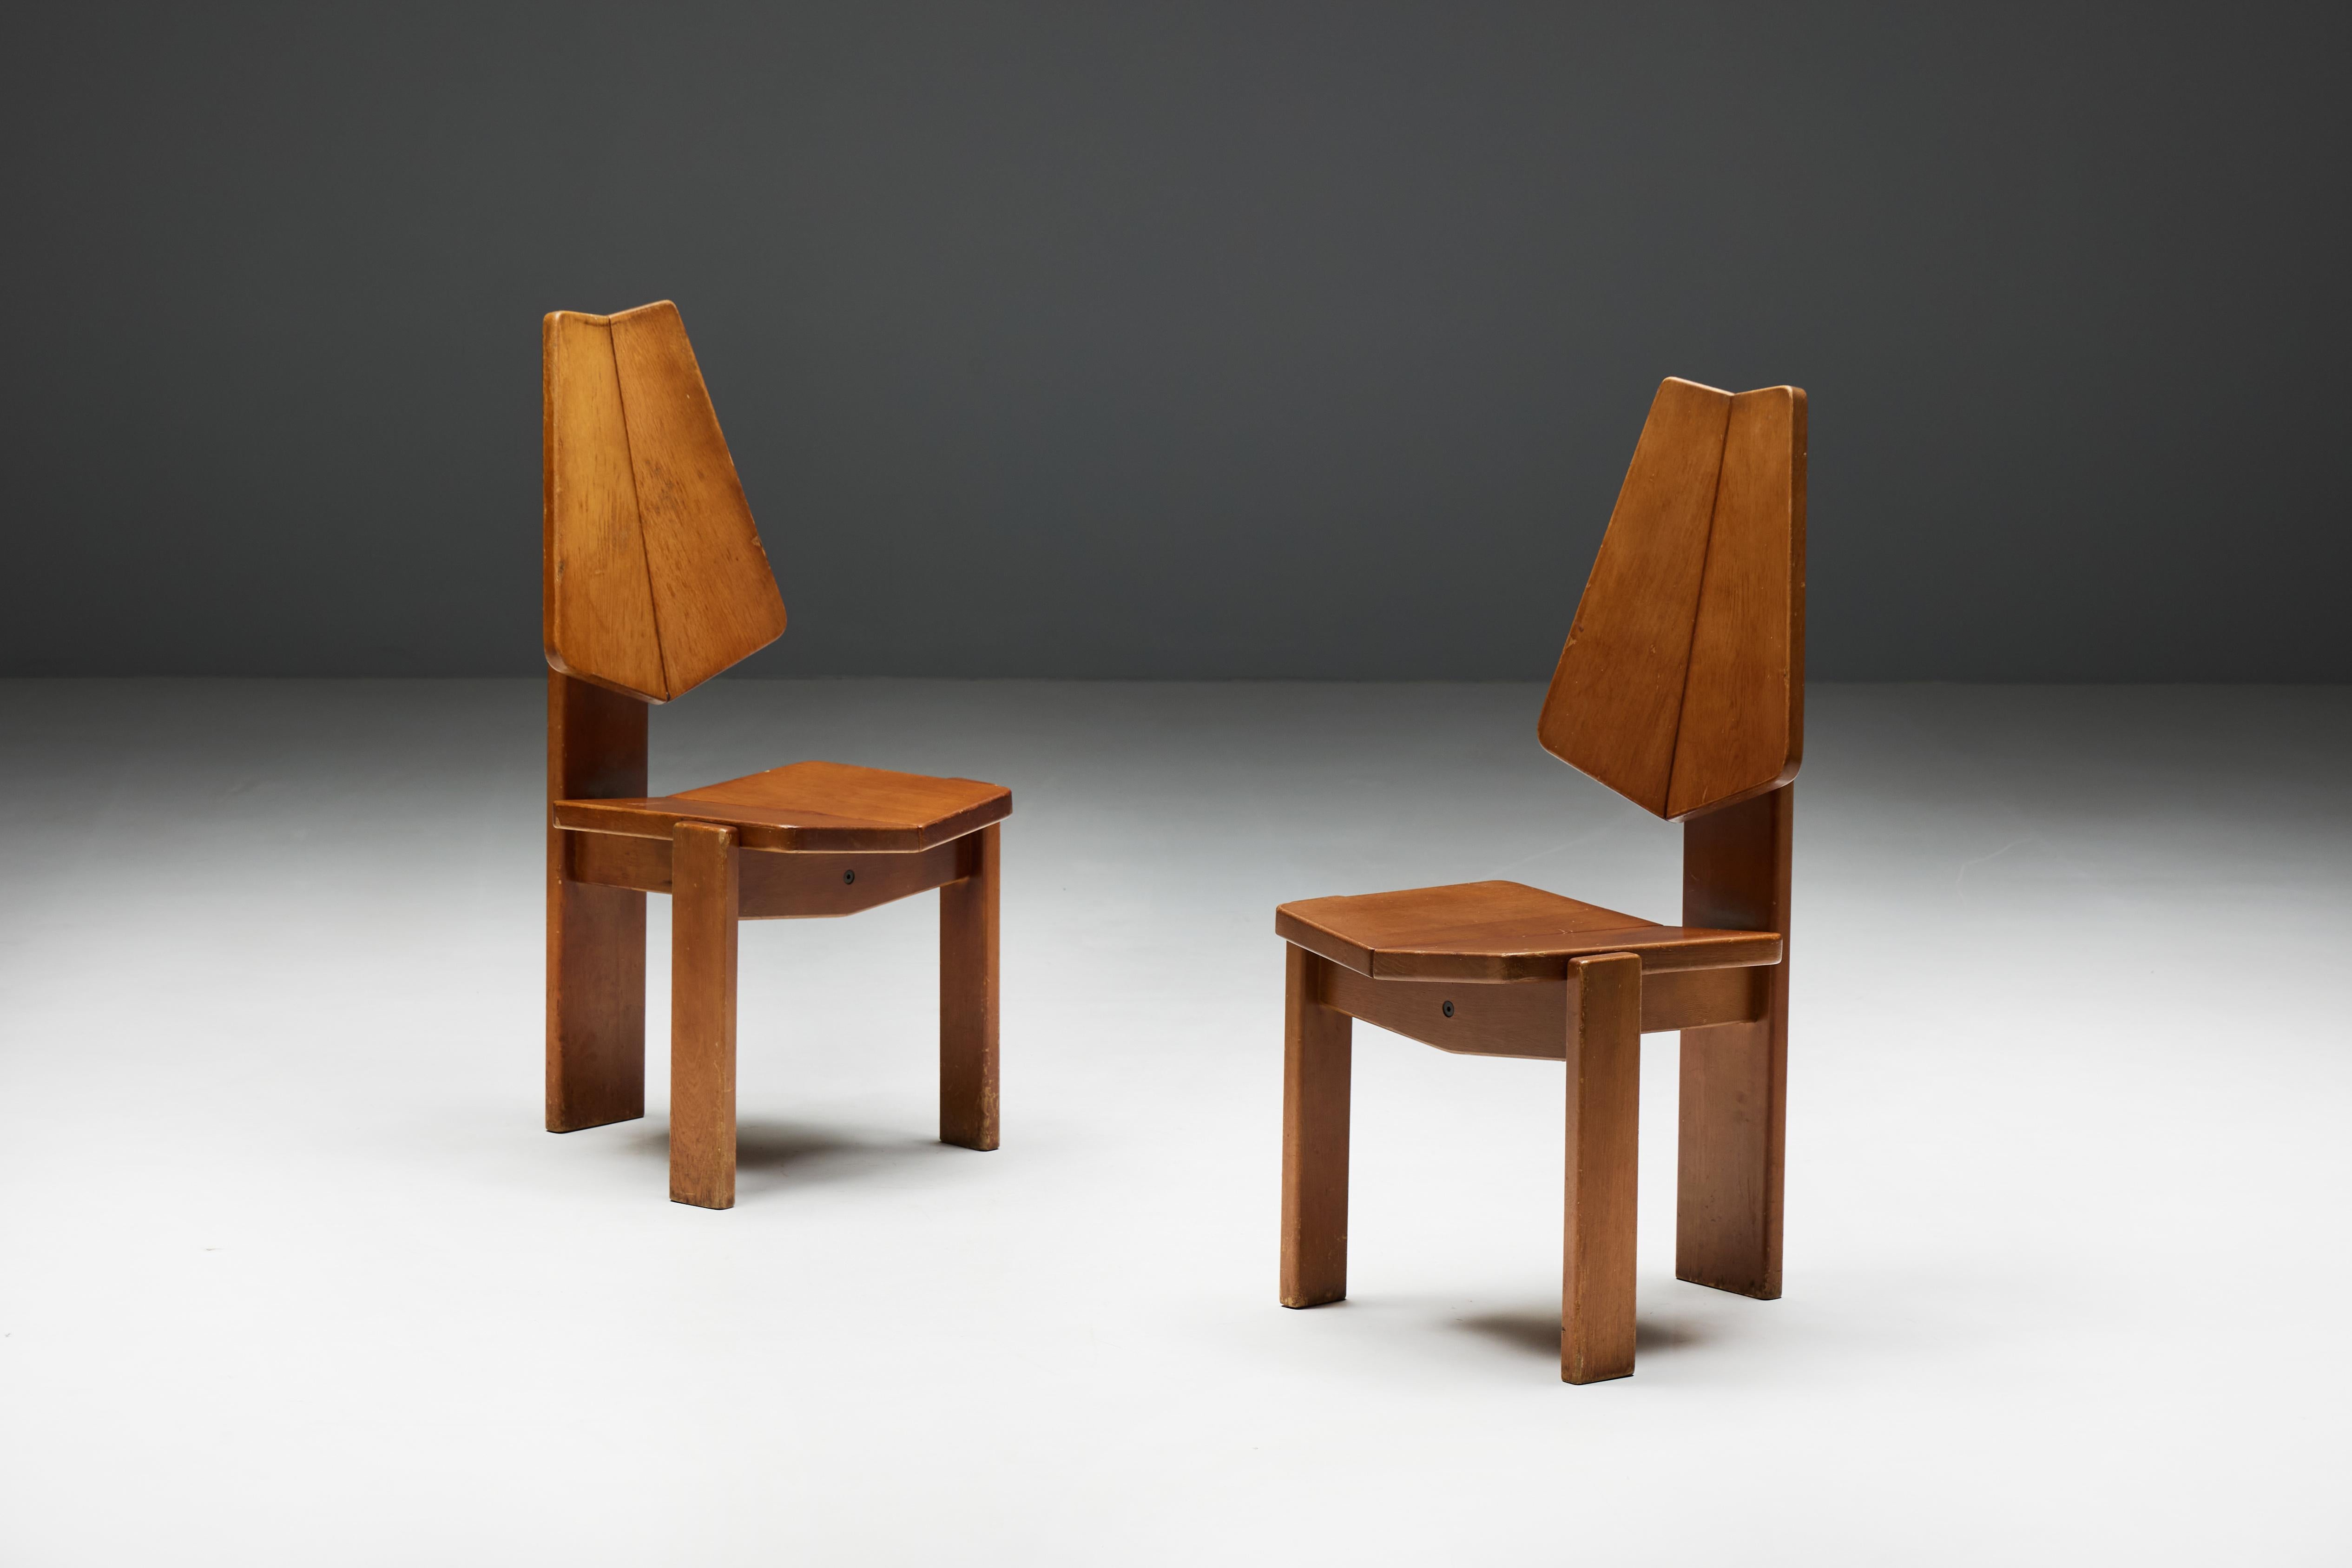 Brutalist Wooden Dining Chairs, Belgium, 1970s For Sale 2